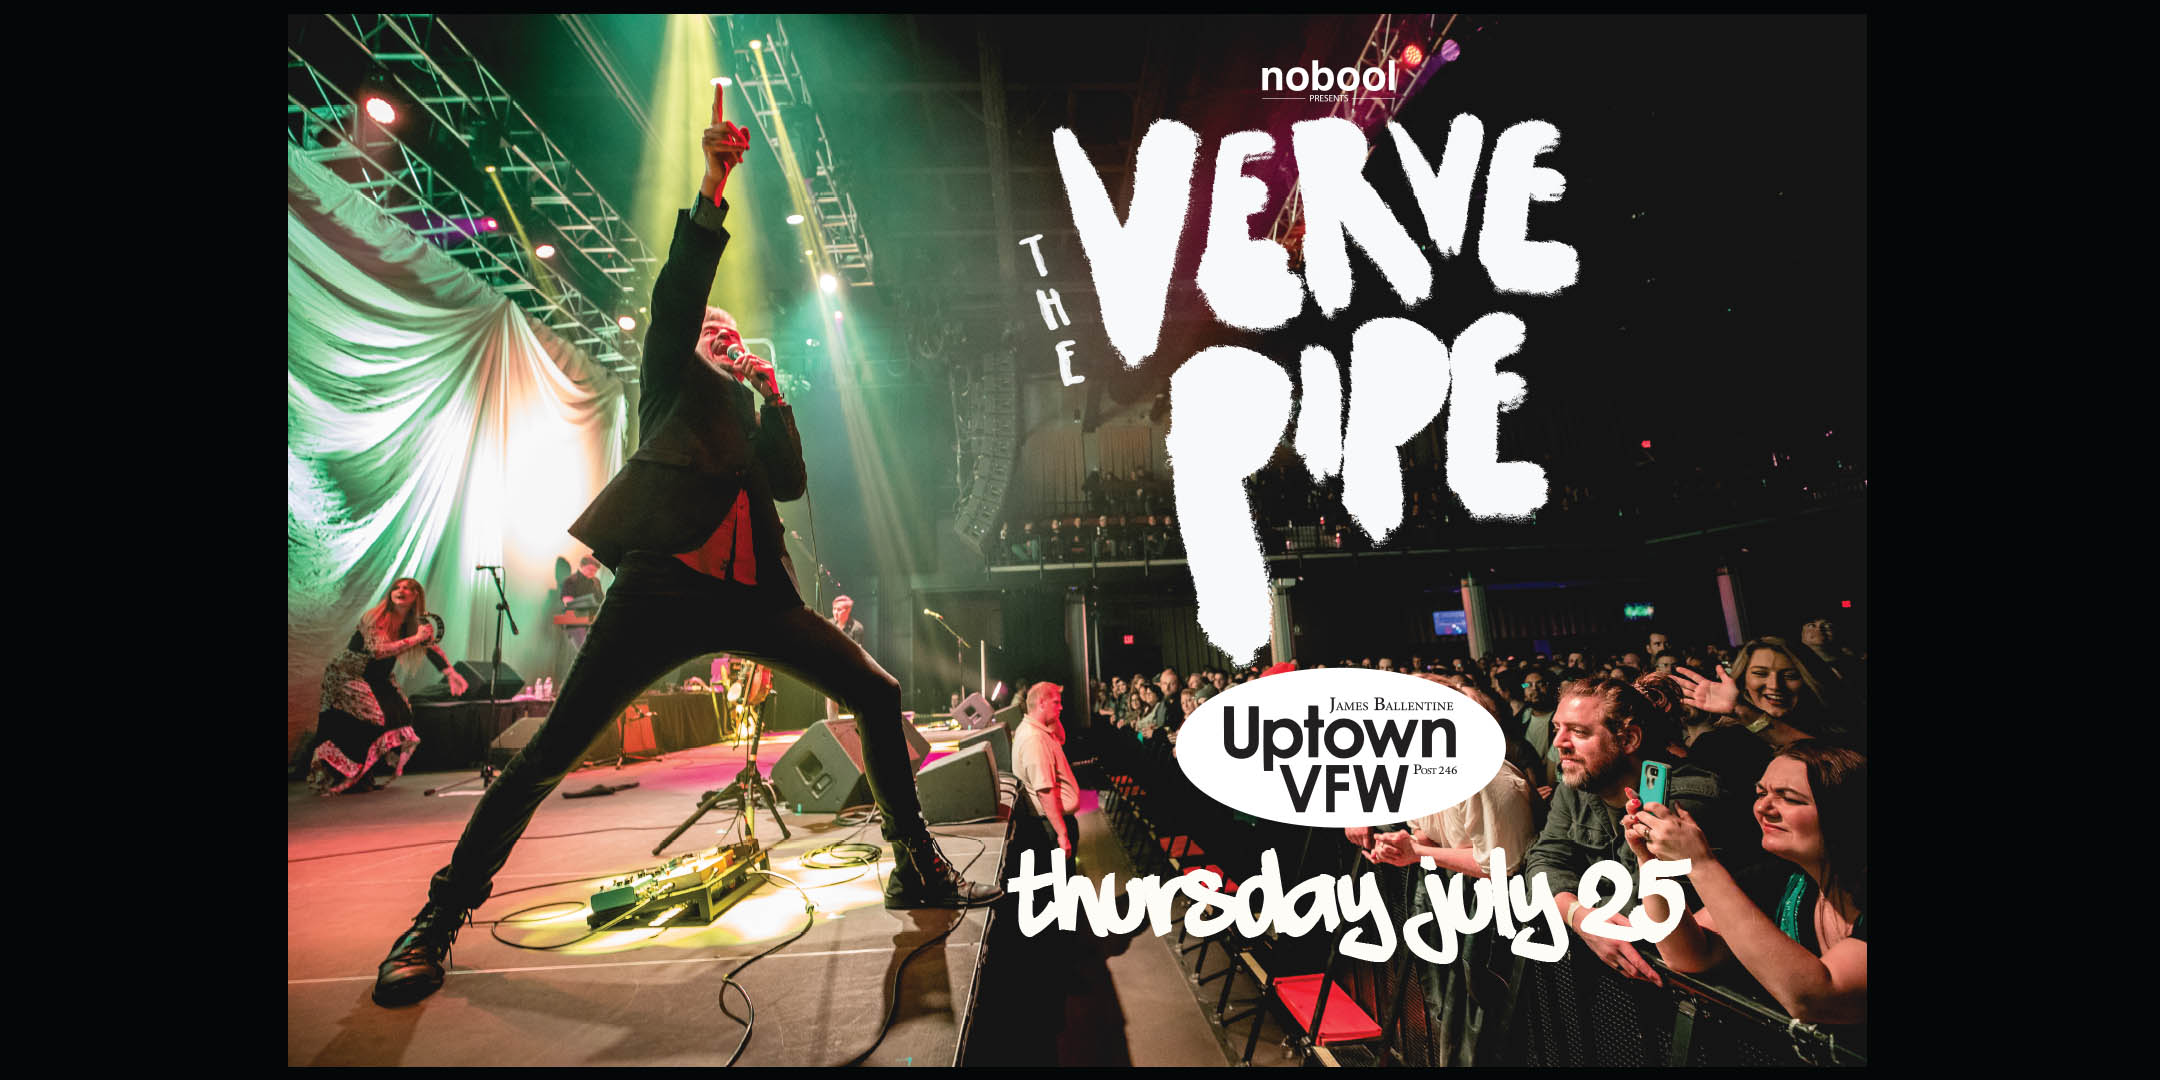 The Verve Pipe Thursday July 25 James Ballentine "Uptown" VFW Post 246 Doors 8:00pm :: Music 9:00pm :: 21+ GA $32 ADV / $38 DOS NO REFUNDS Tickets On Sale Now